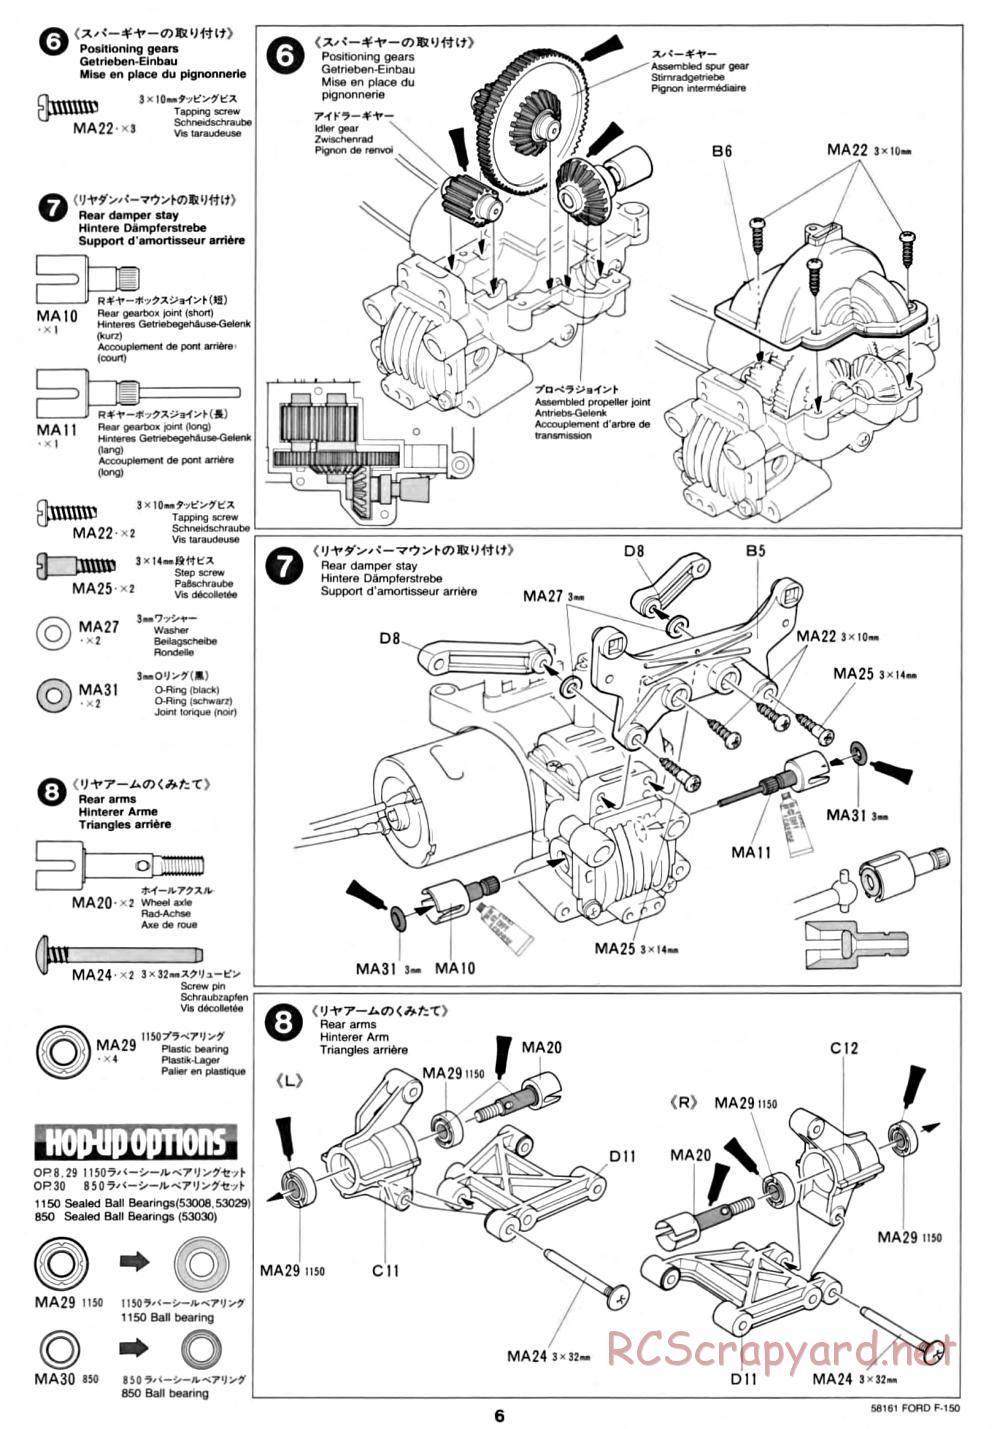 Tamiya - Ford F-150 Truck Chassis - Manual - Page 6